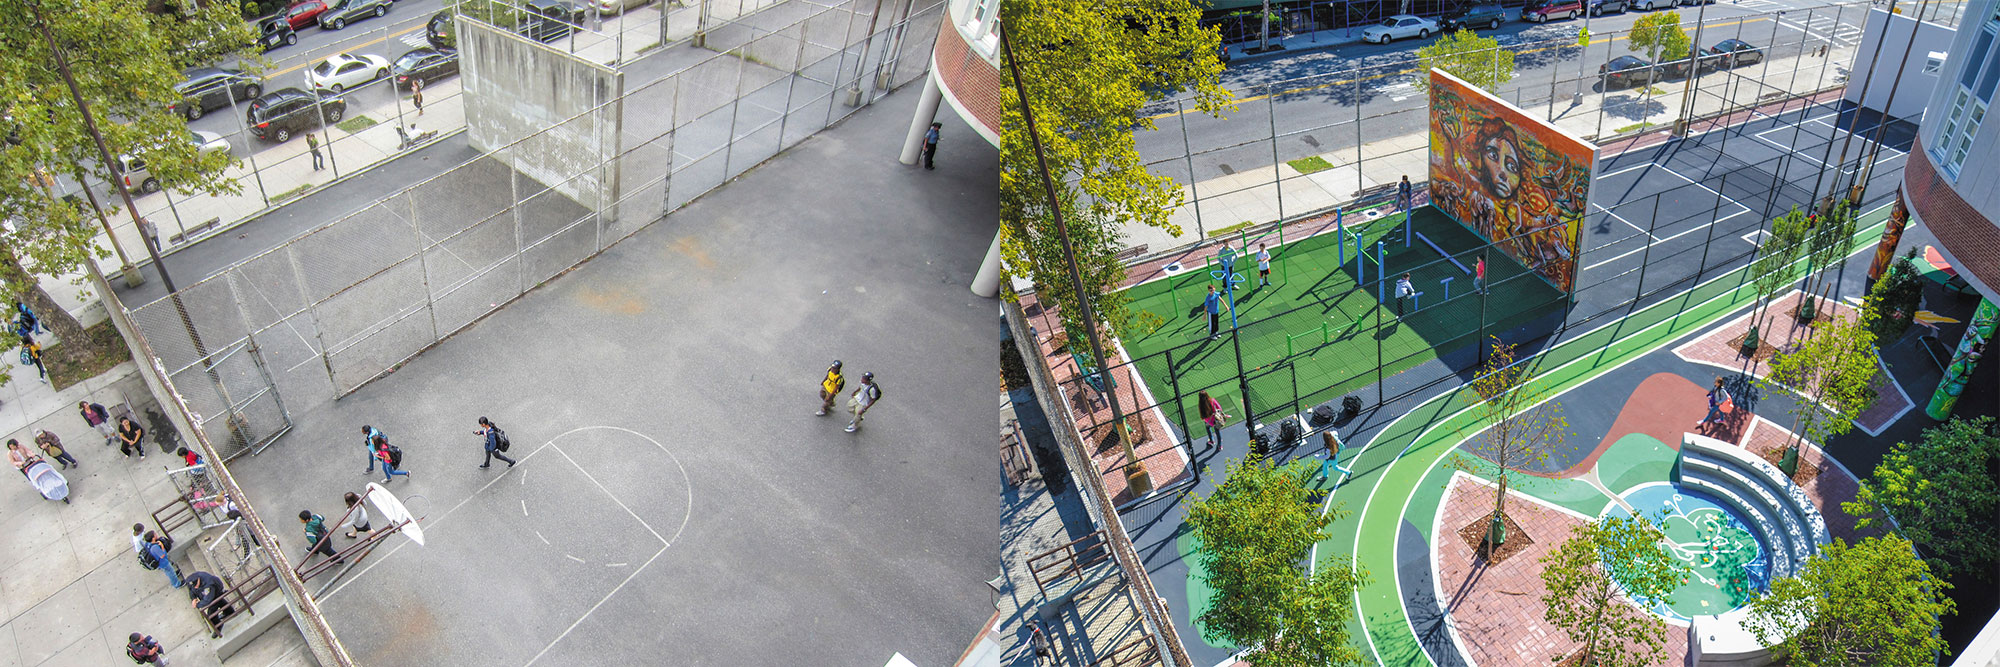 Two pictures of a basketball court and a playground.